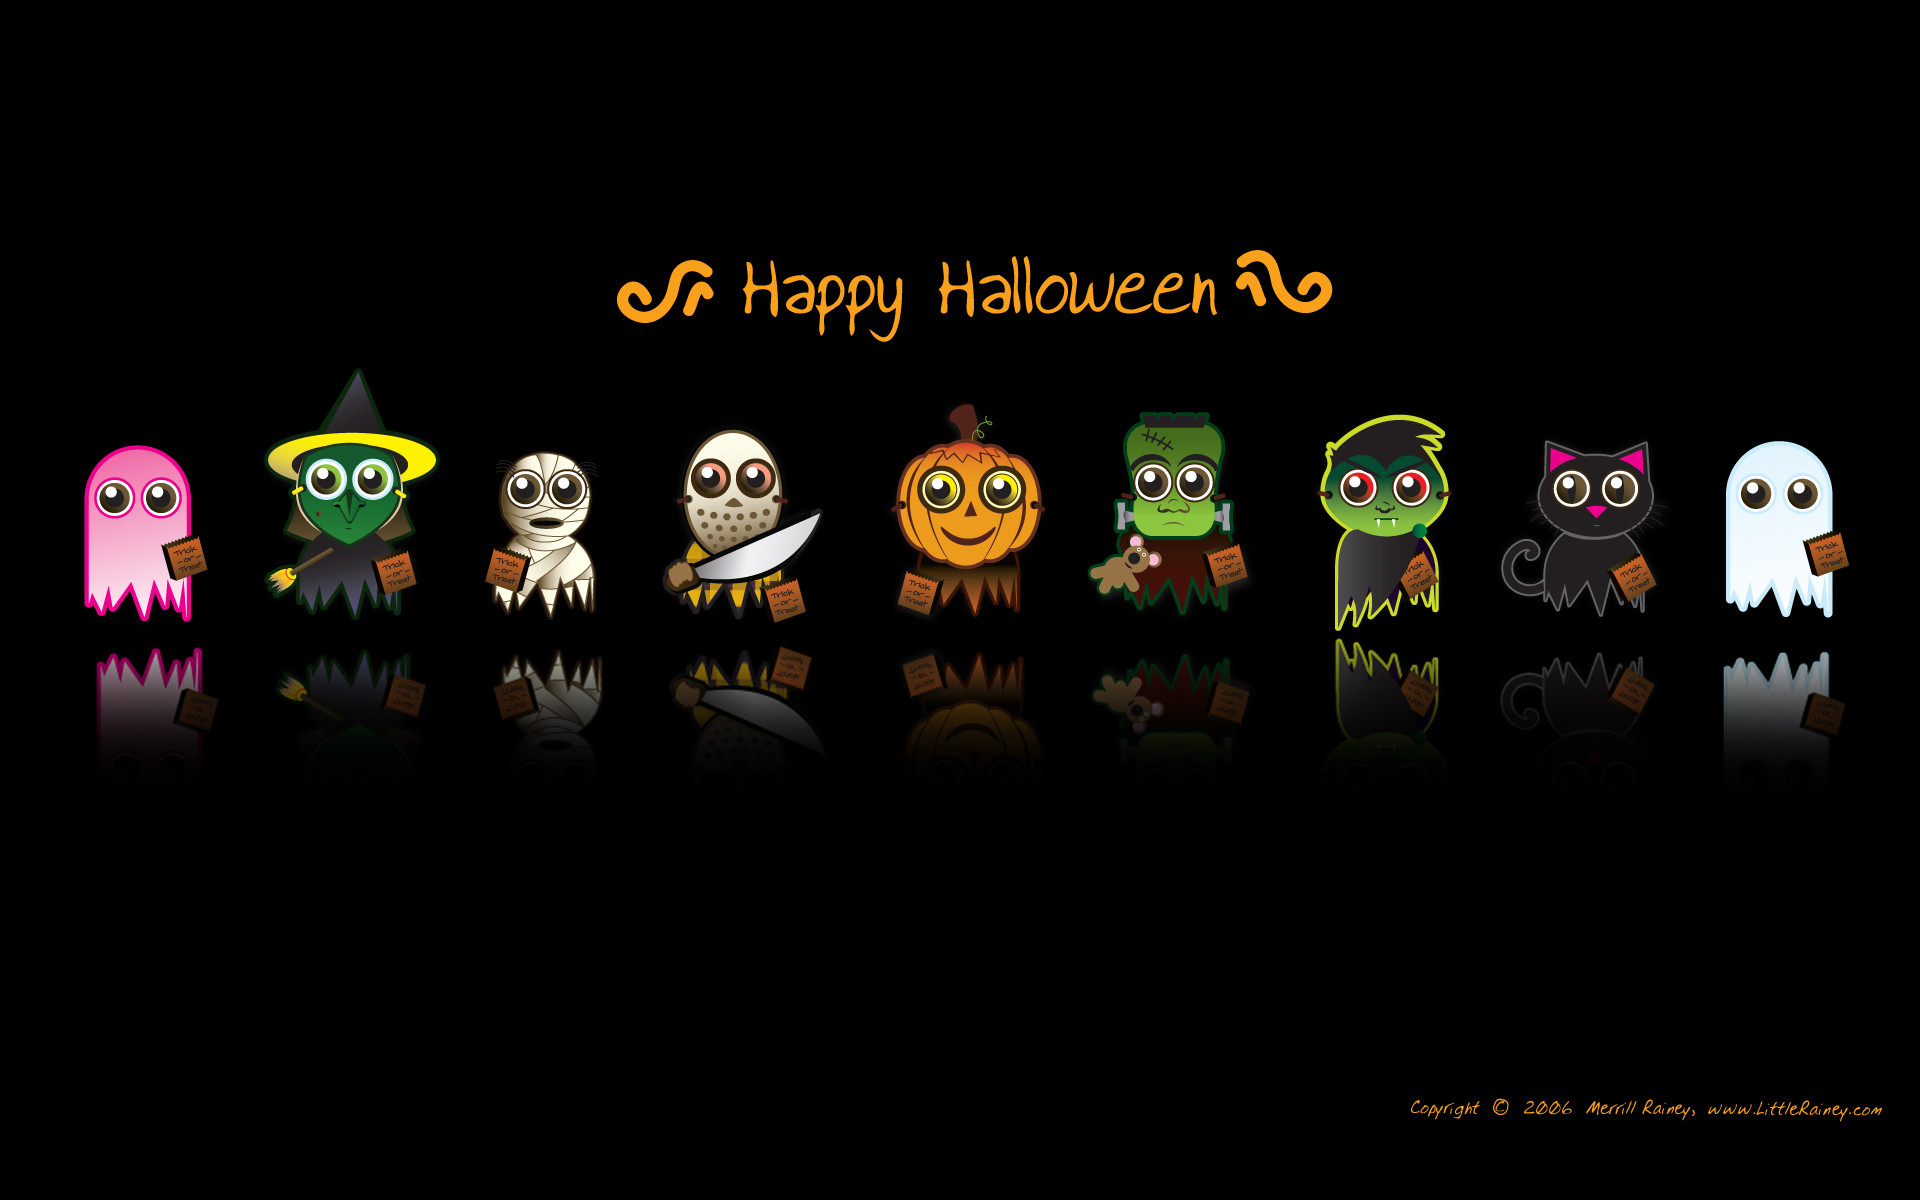 Wallpapers desktop themes holidays halloween funny animated ghost .